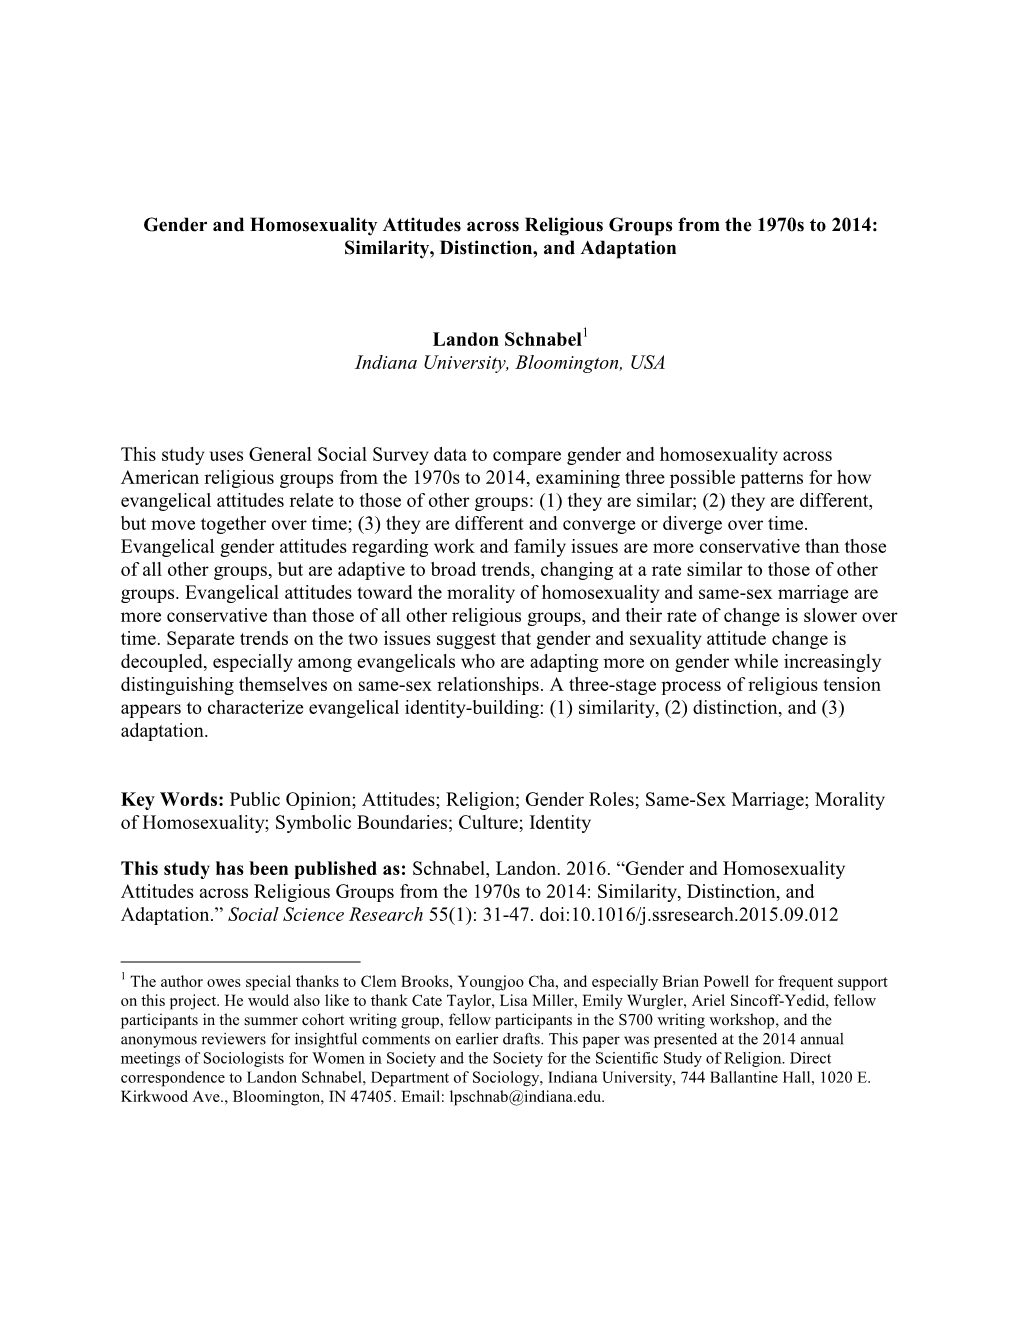 Gender and Homosexuality Attitudes Across Religious Groups from the 1970S to 2014: Similarity, Distinction, and Adaptation